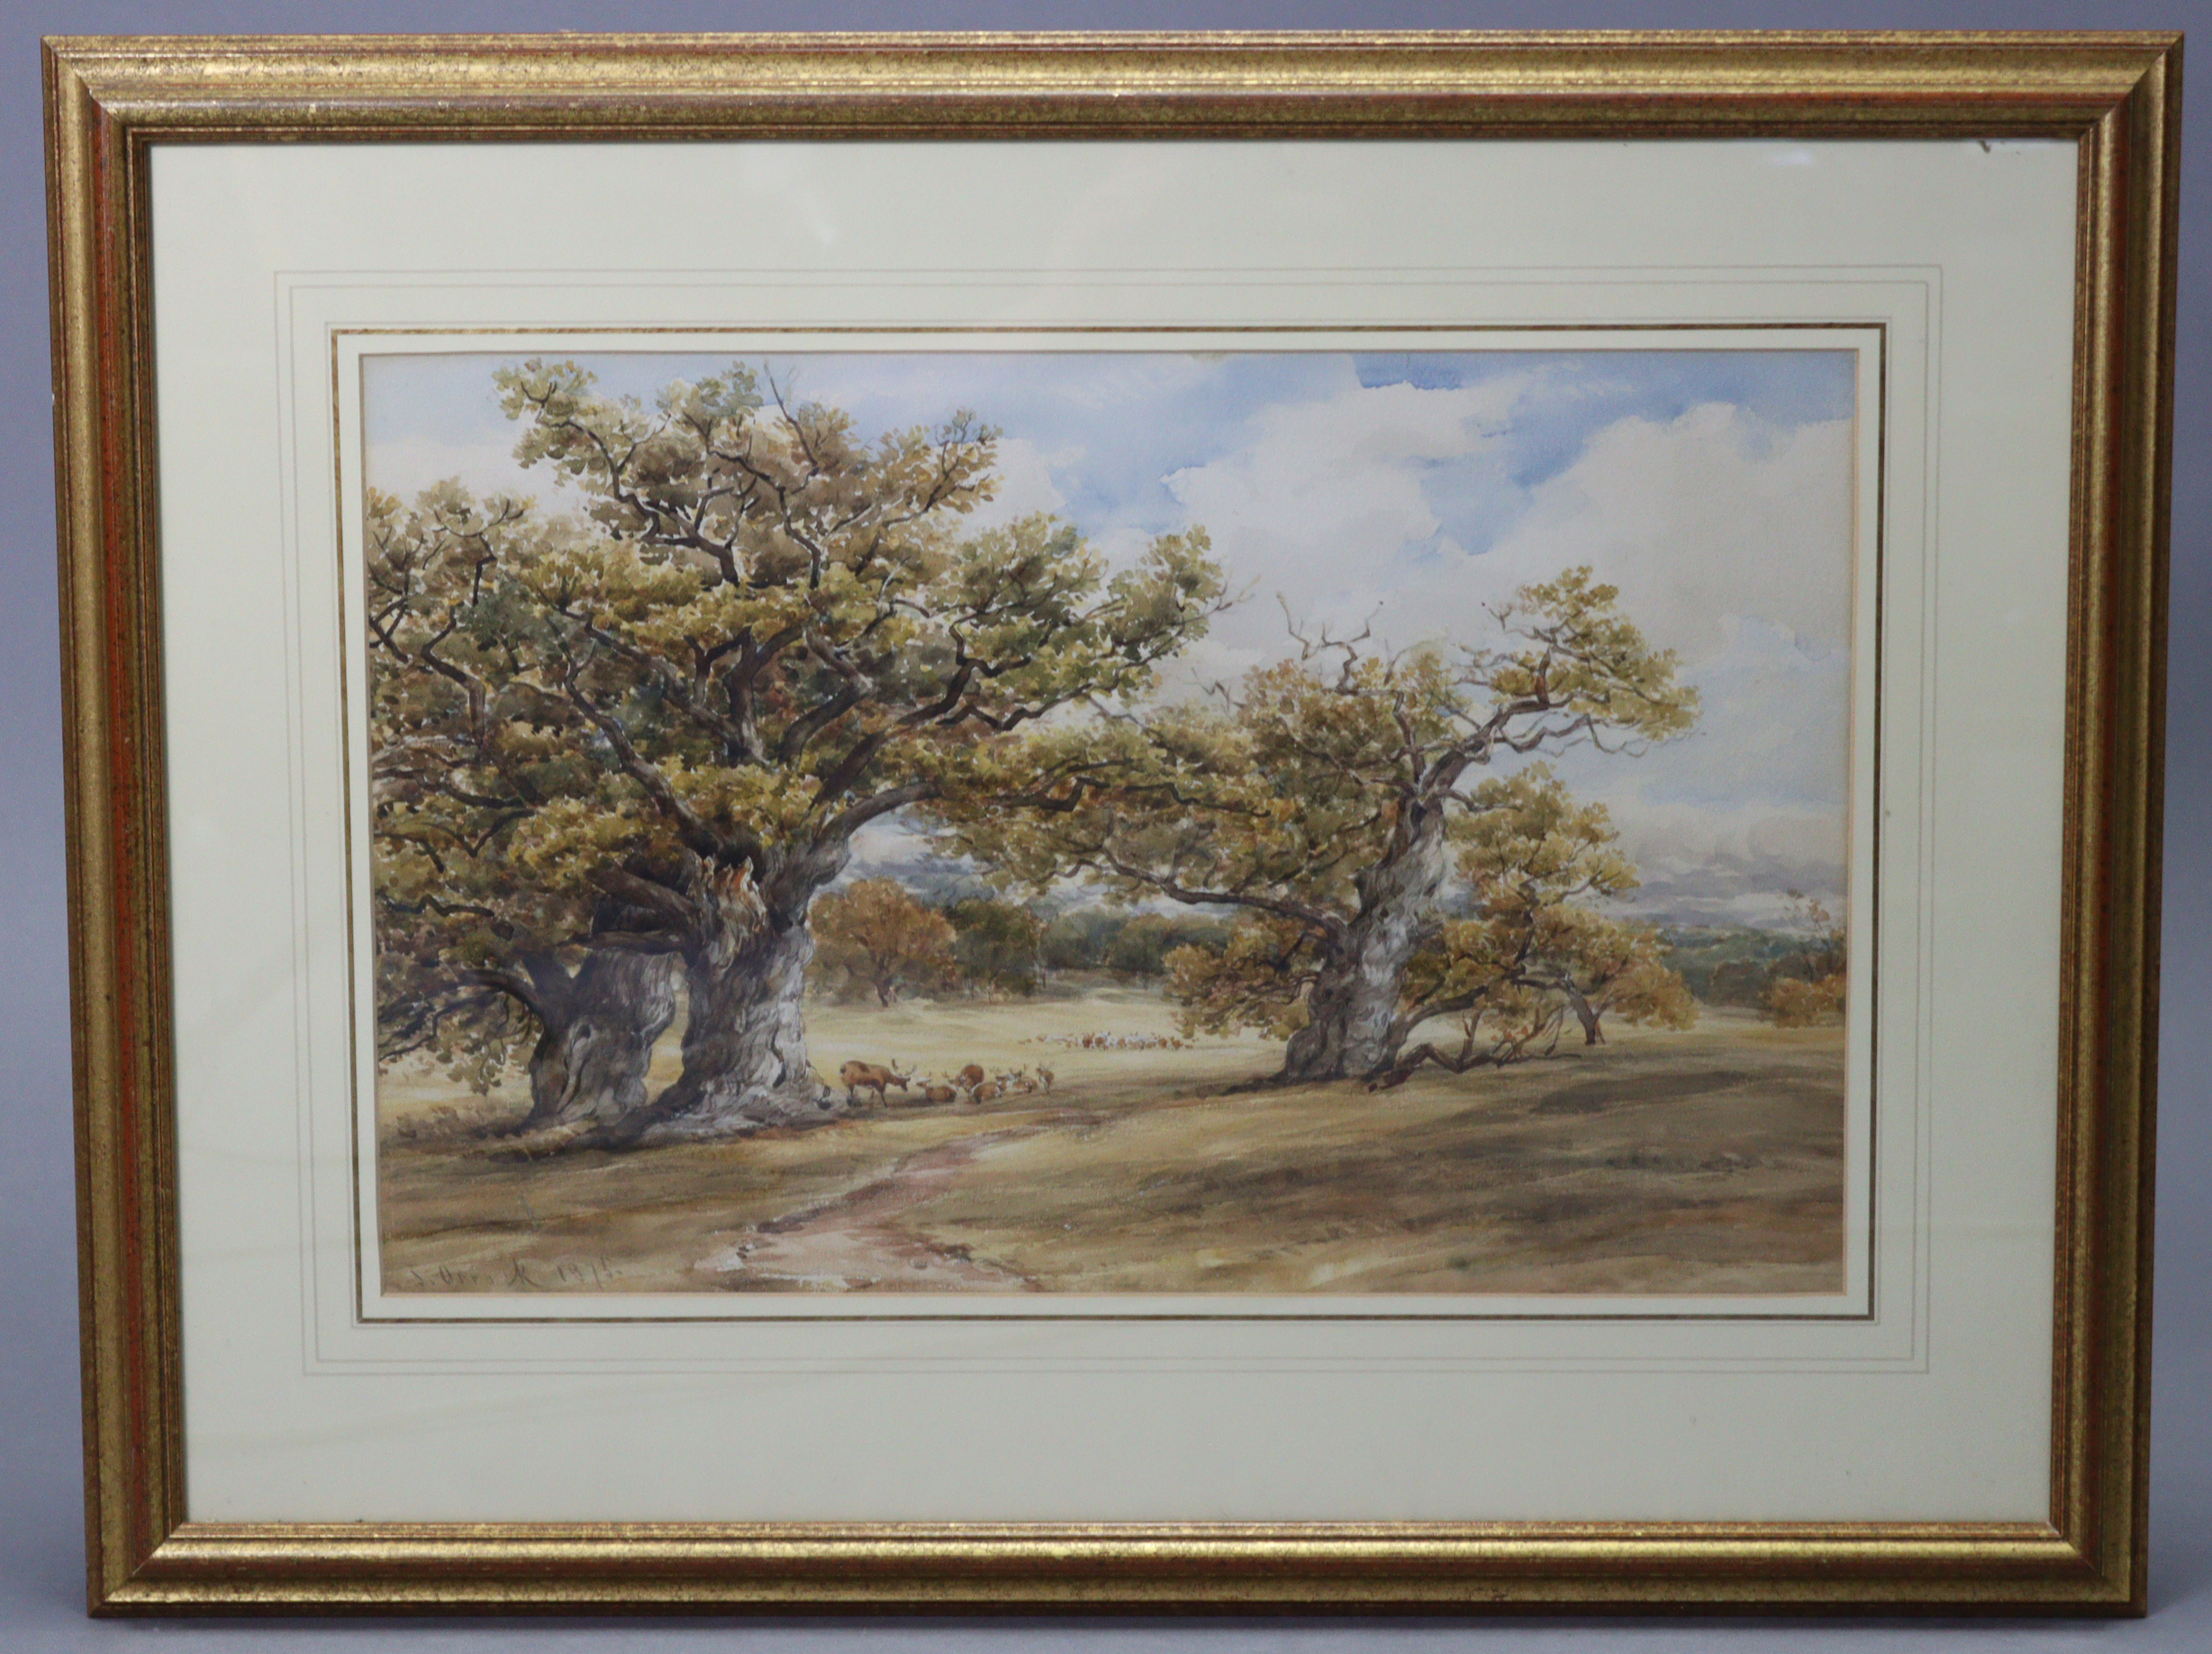 JAMES ORROCK, R. I. (1829-1913). Deer in Windsor Park; signed & dated 18756; watercolour: 12½” x